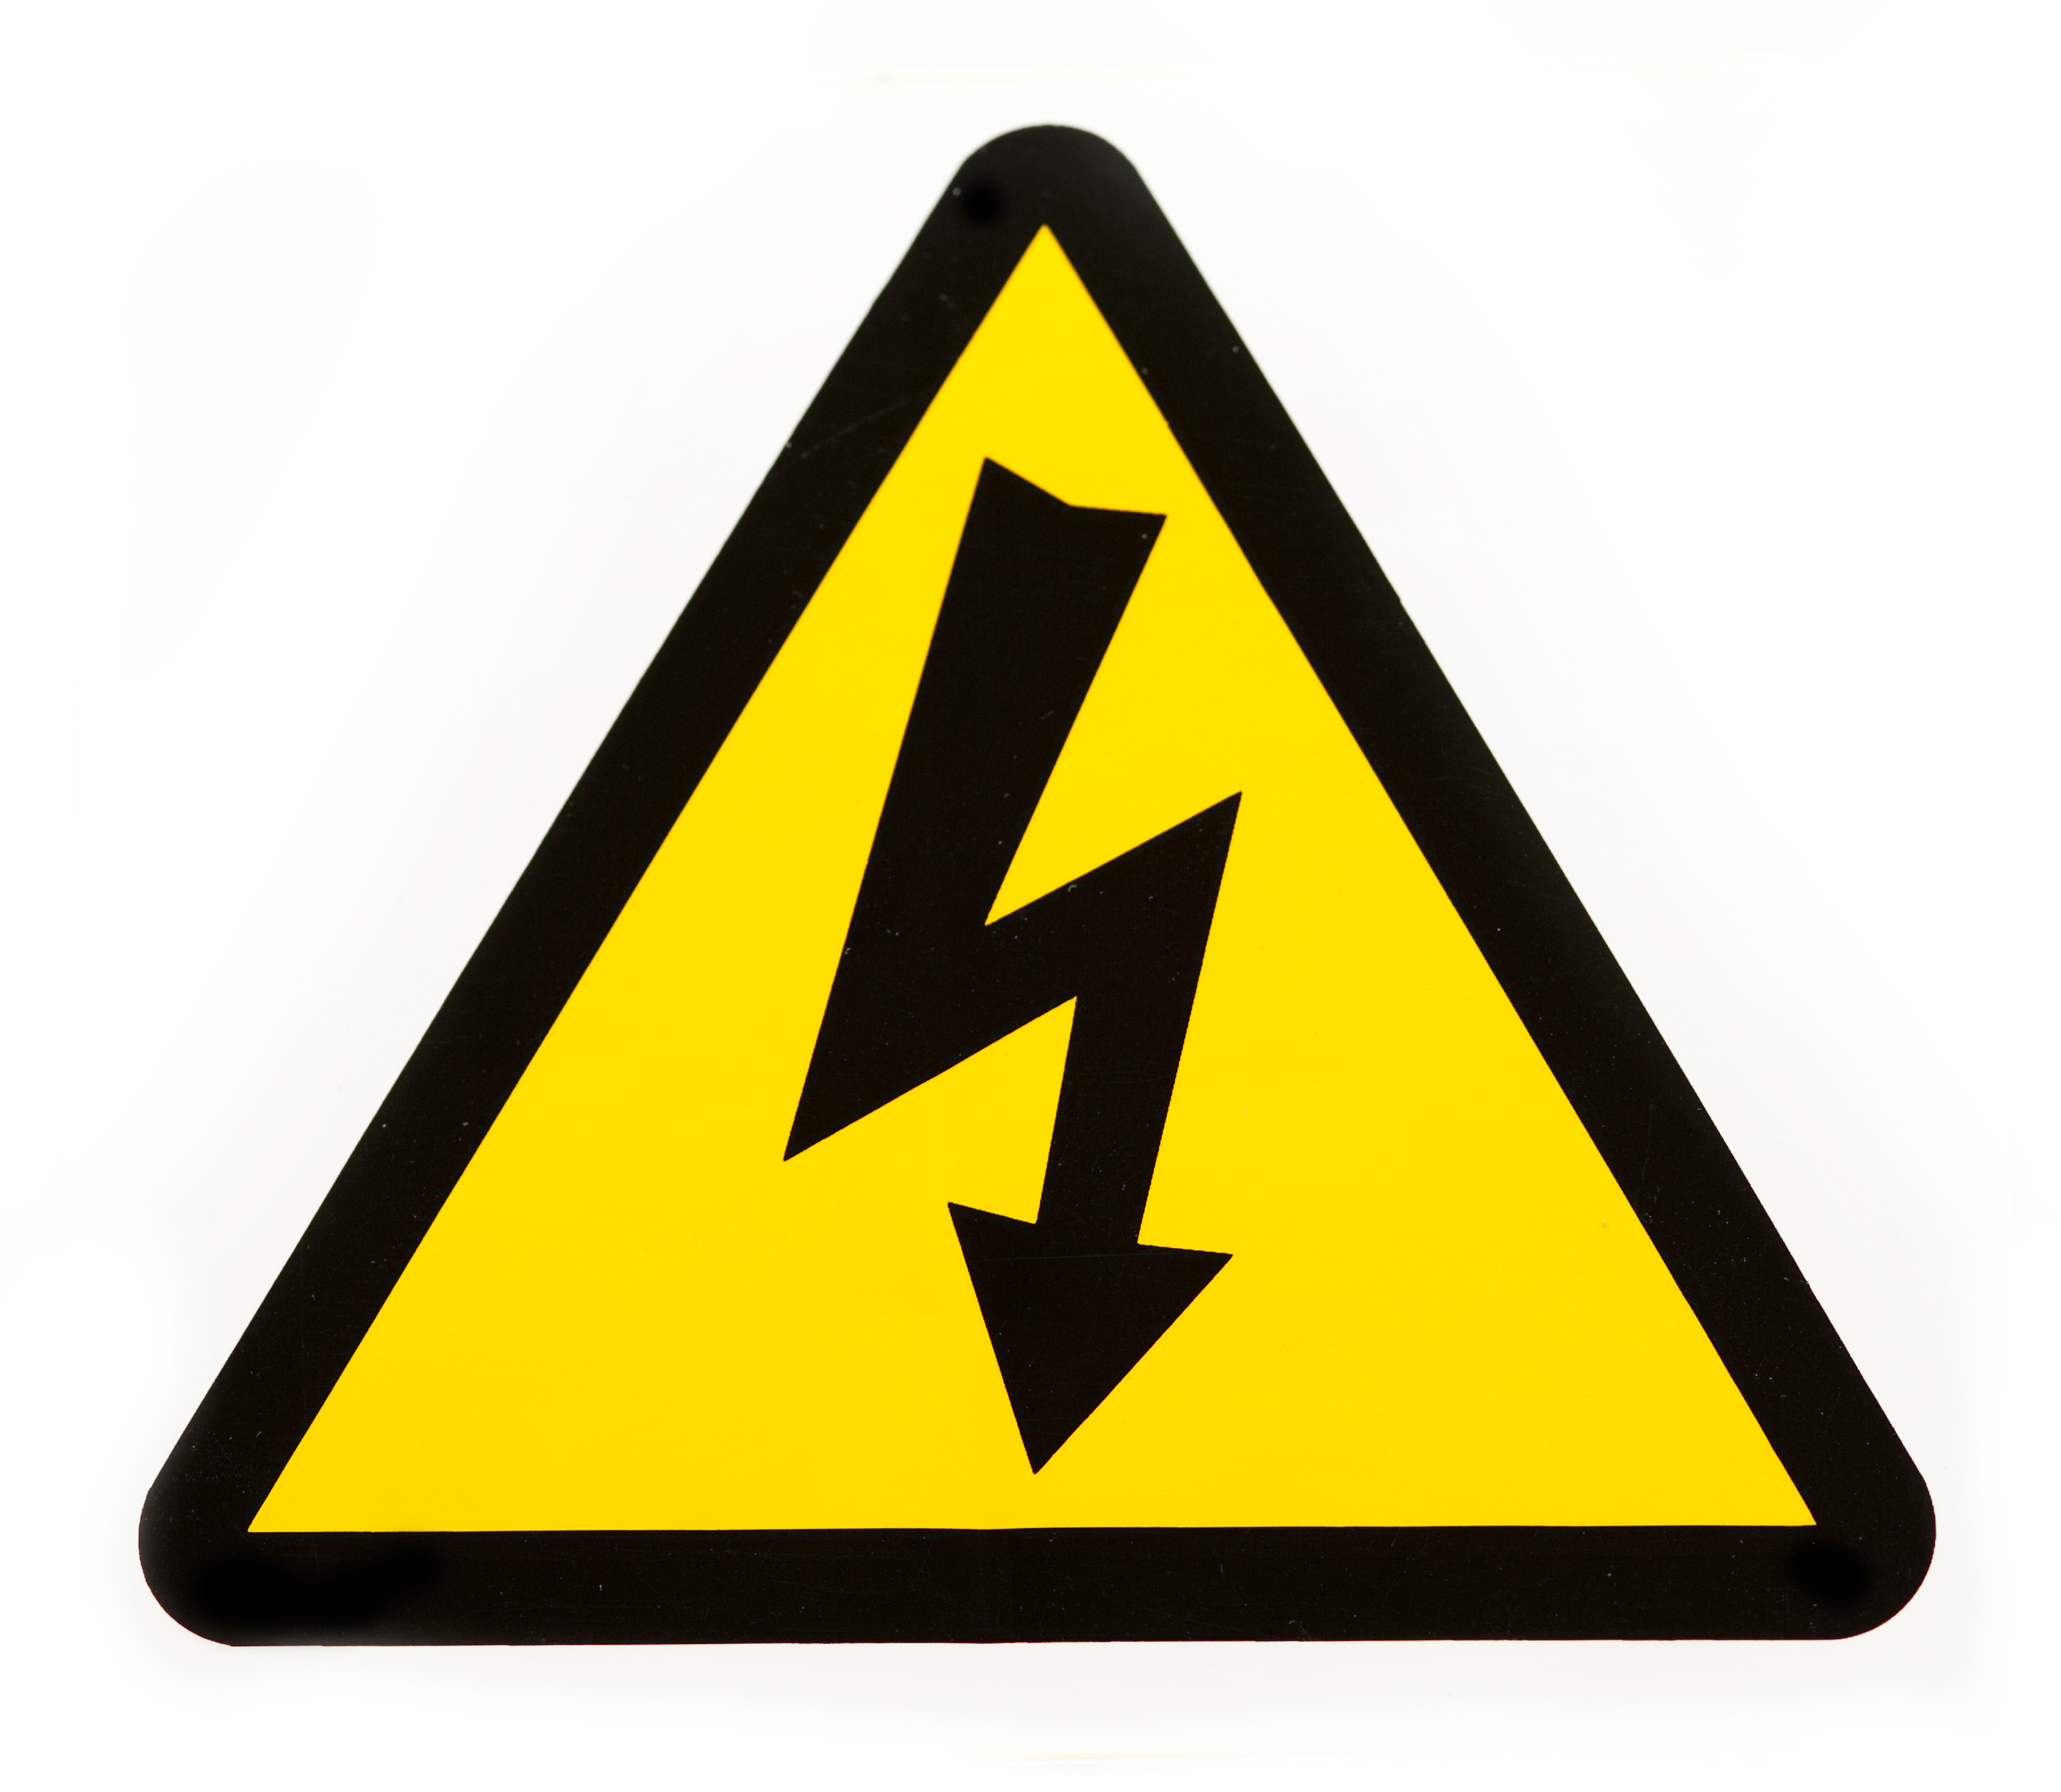 Electrical Safety Symbols Clip Art Electricity Warning Sign Vector | My ...